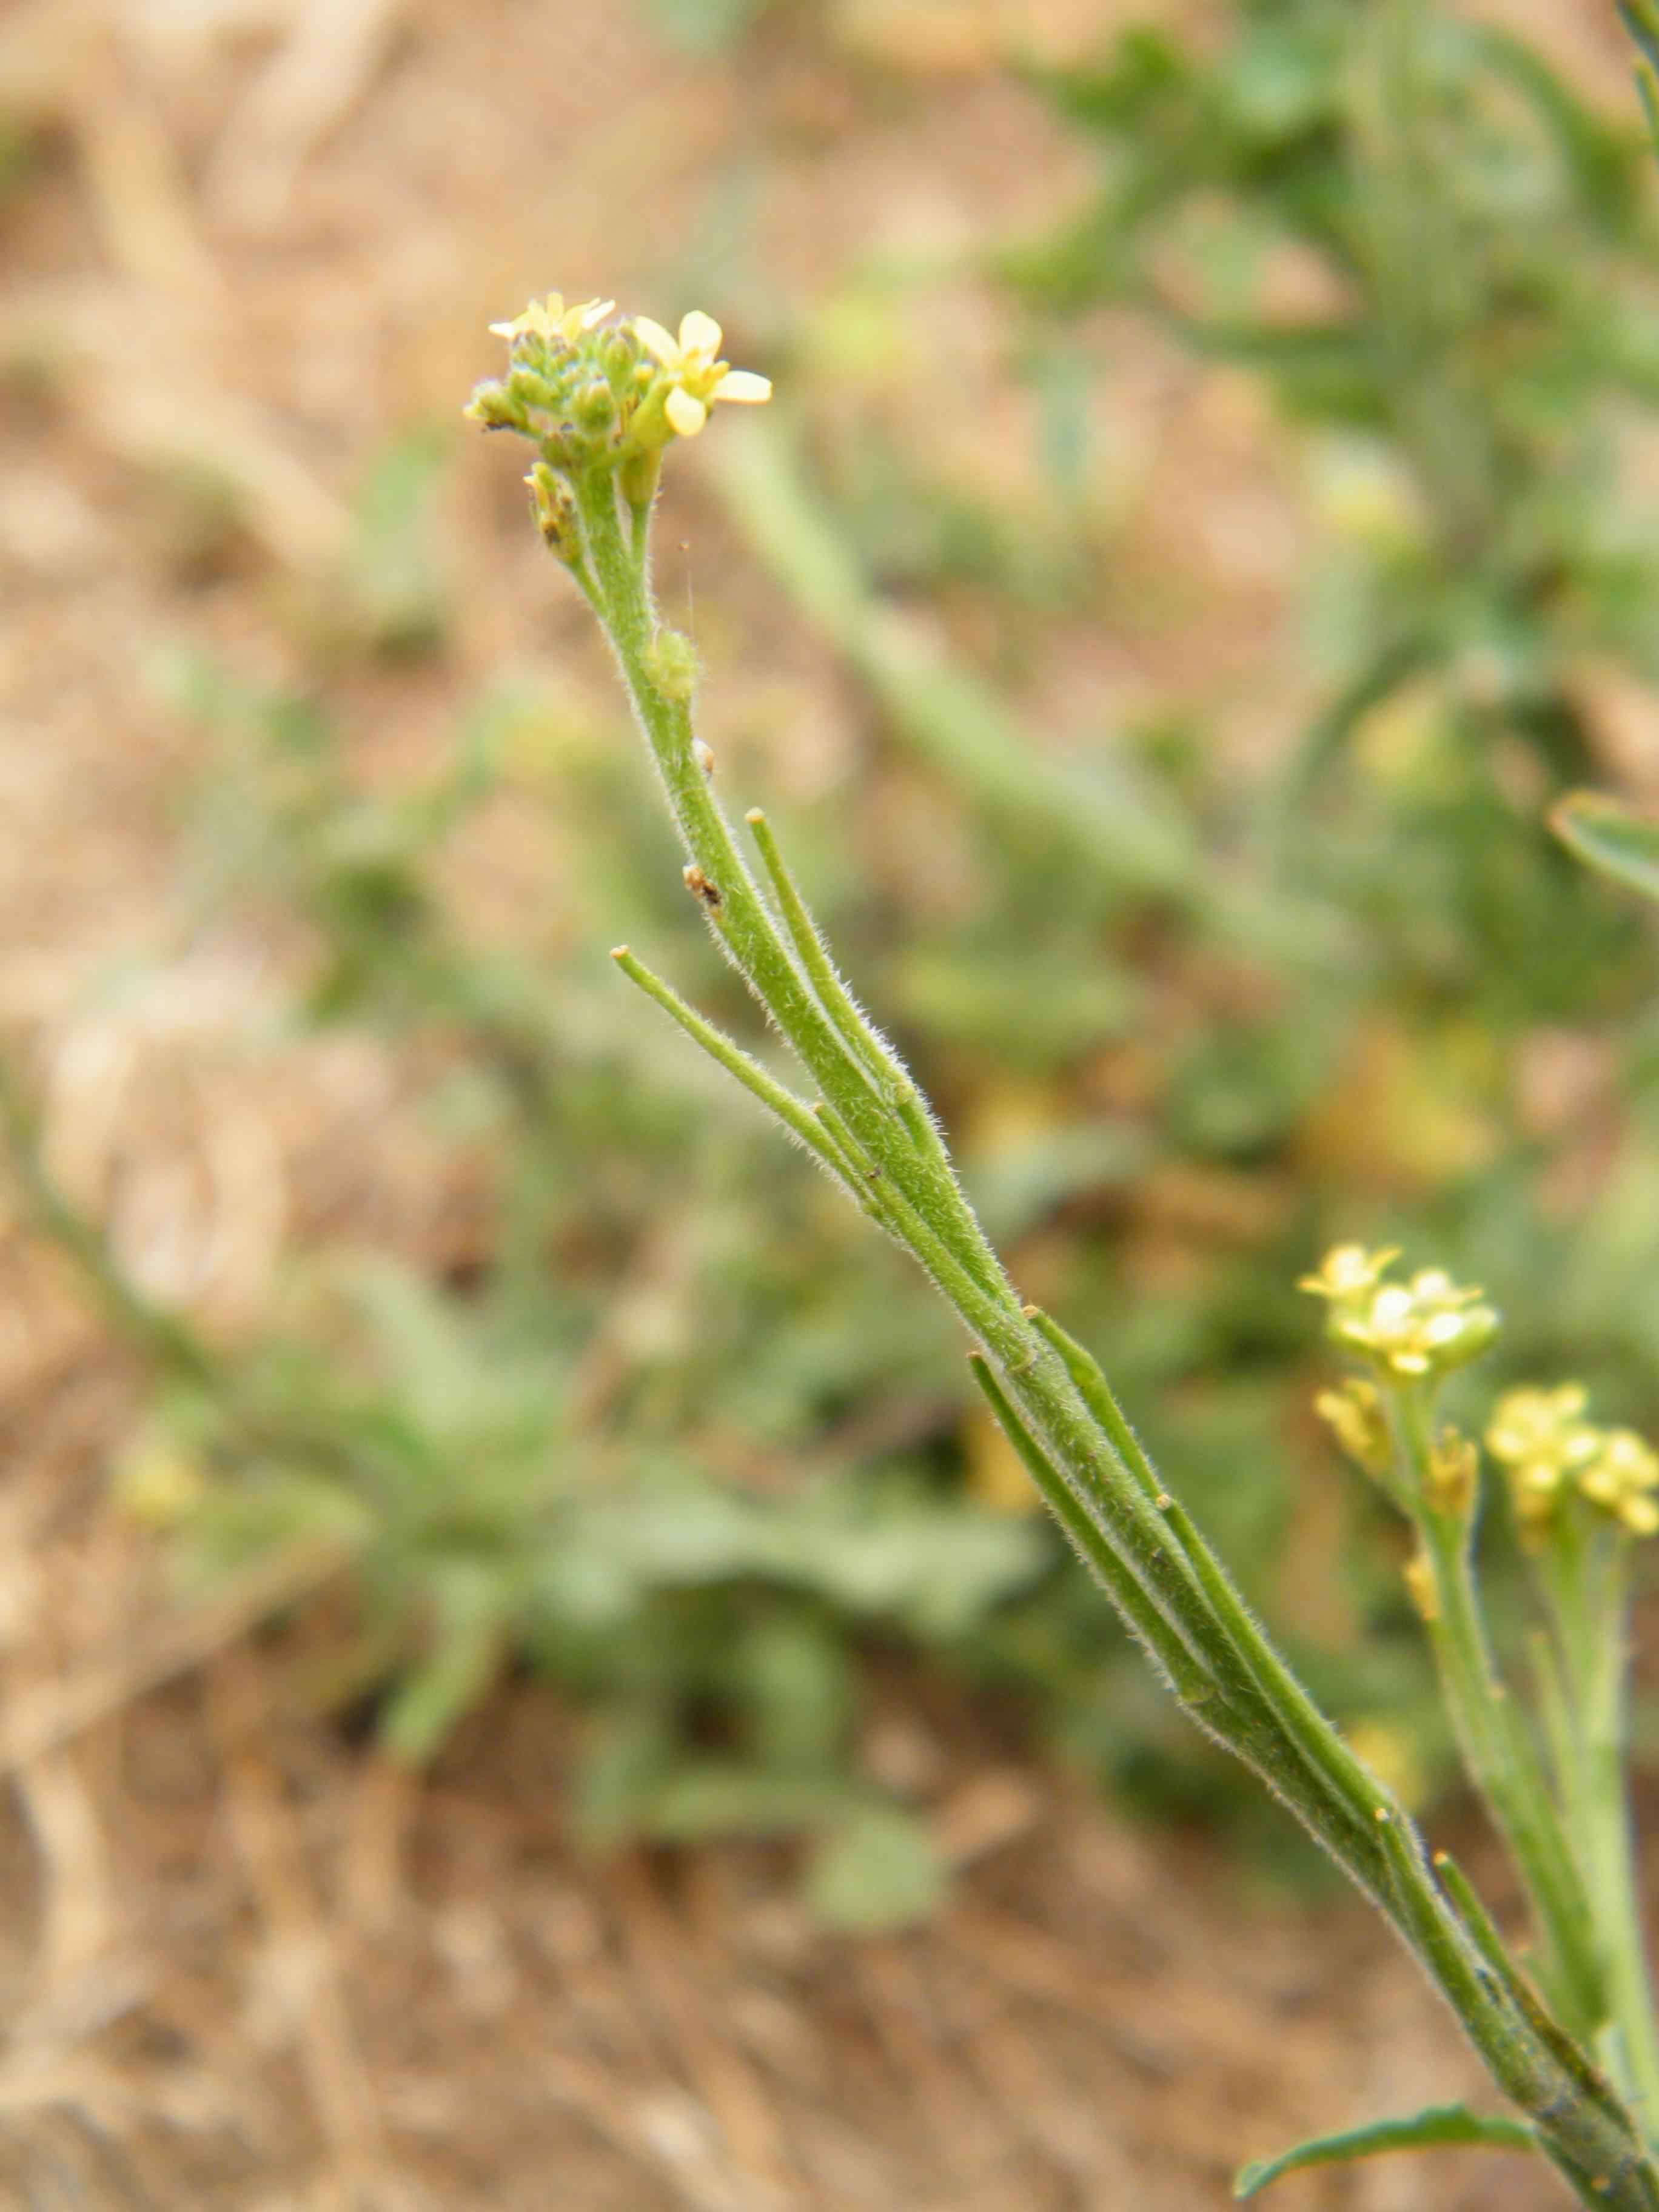 Hedge Mustard - Sisymbrium officinale, species information page